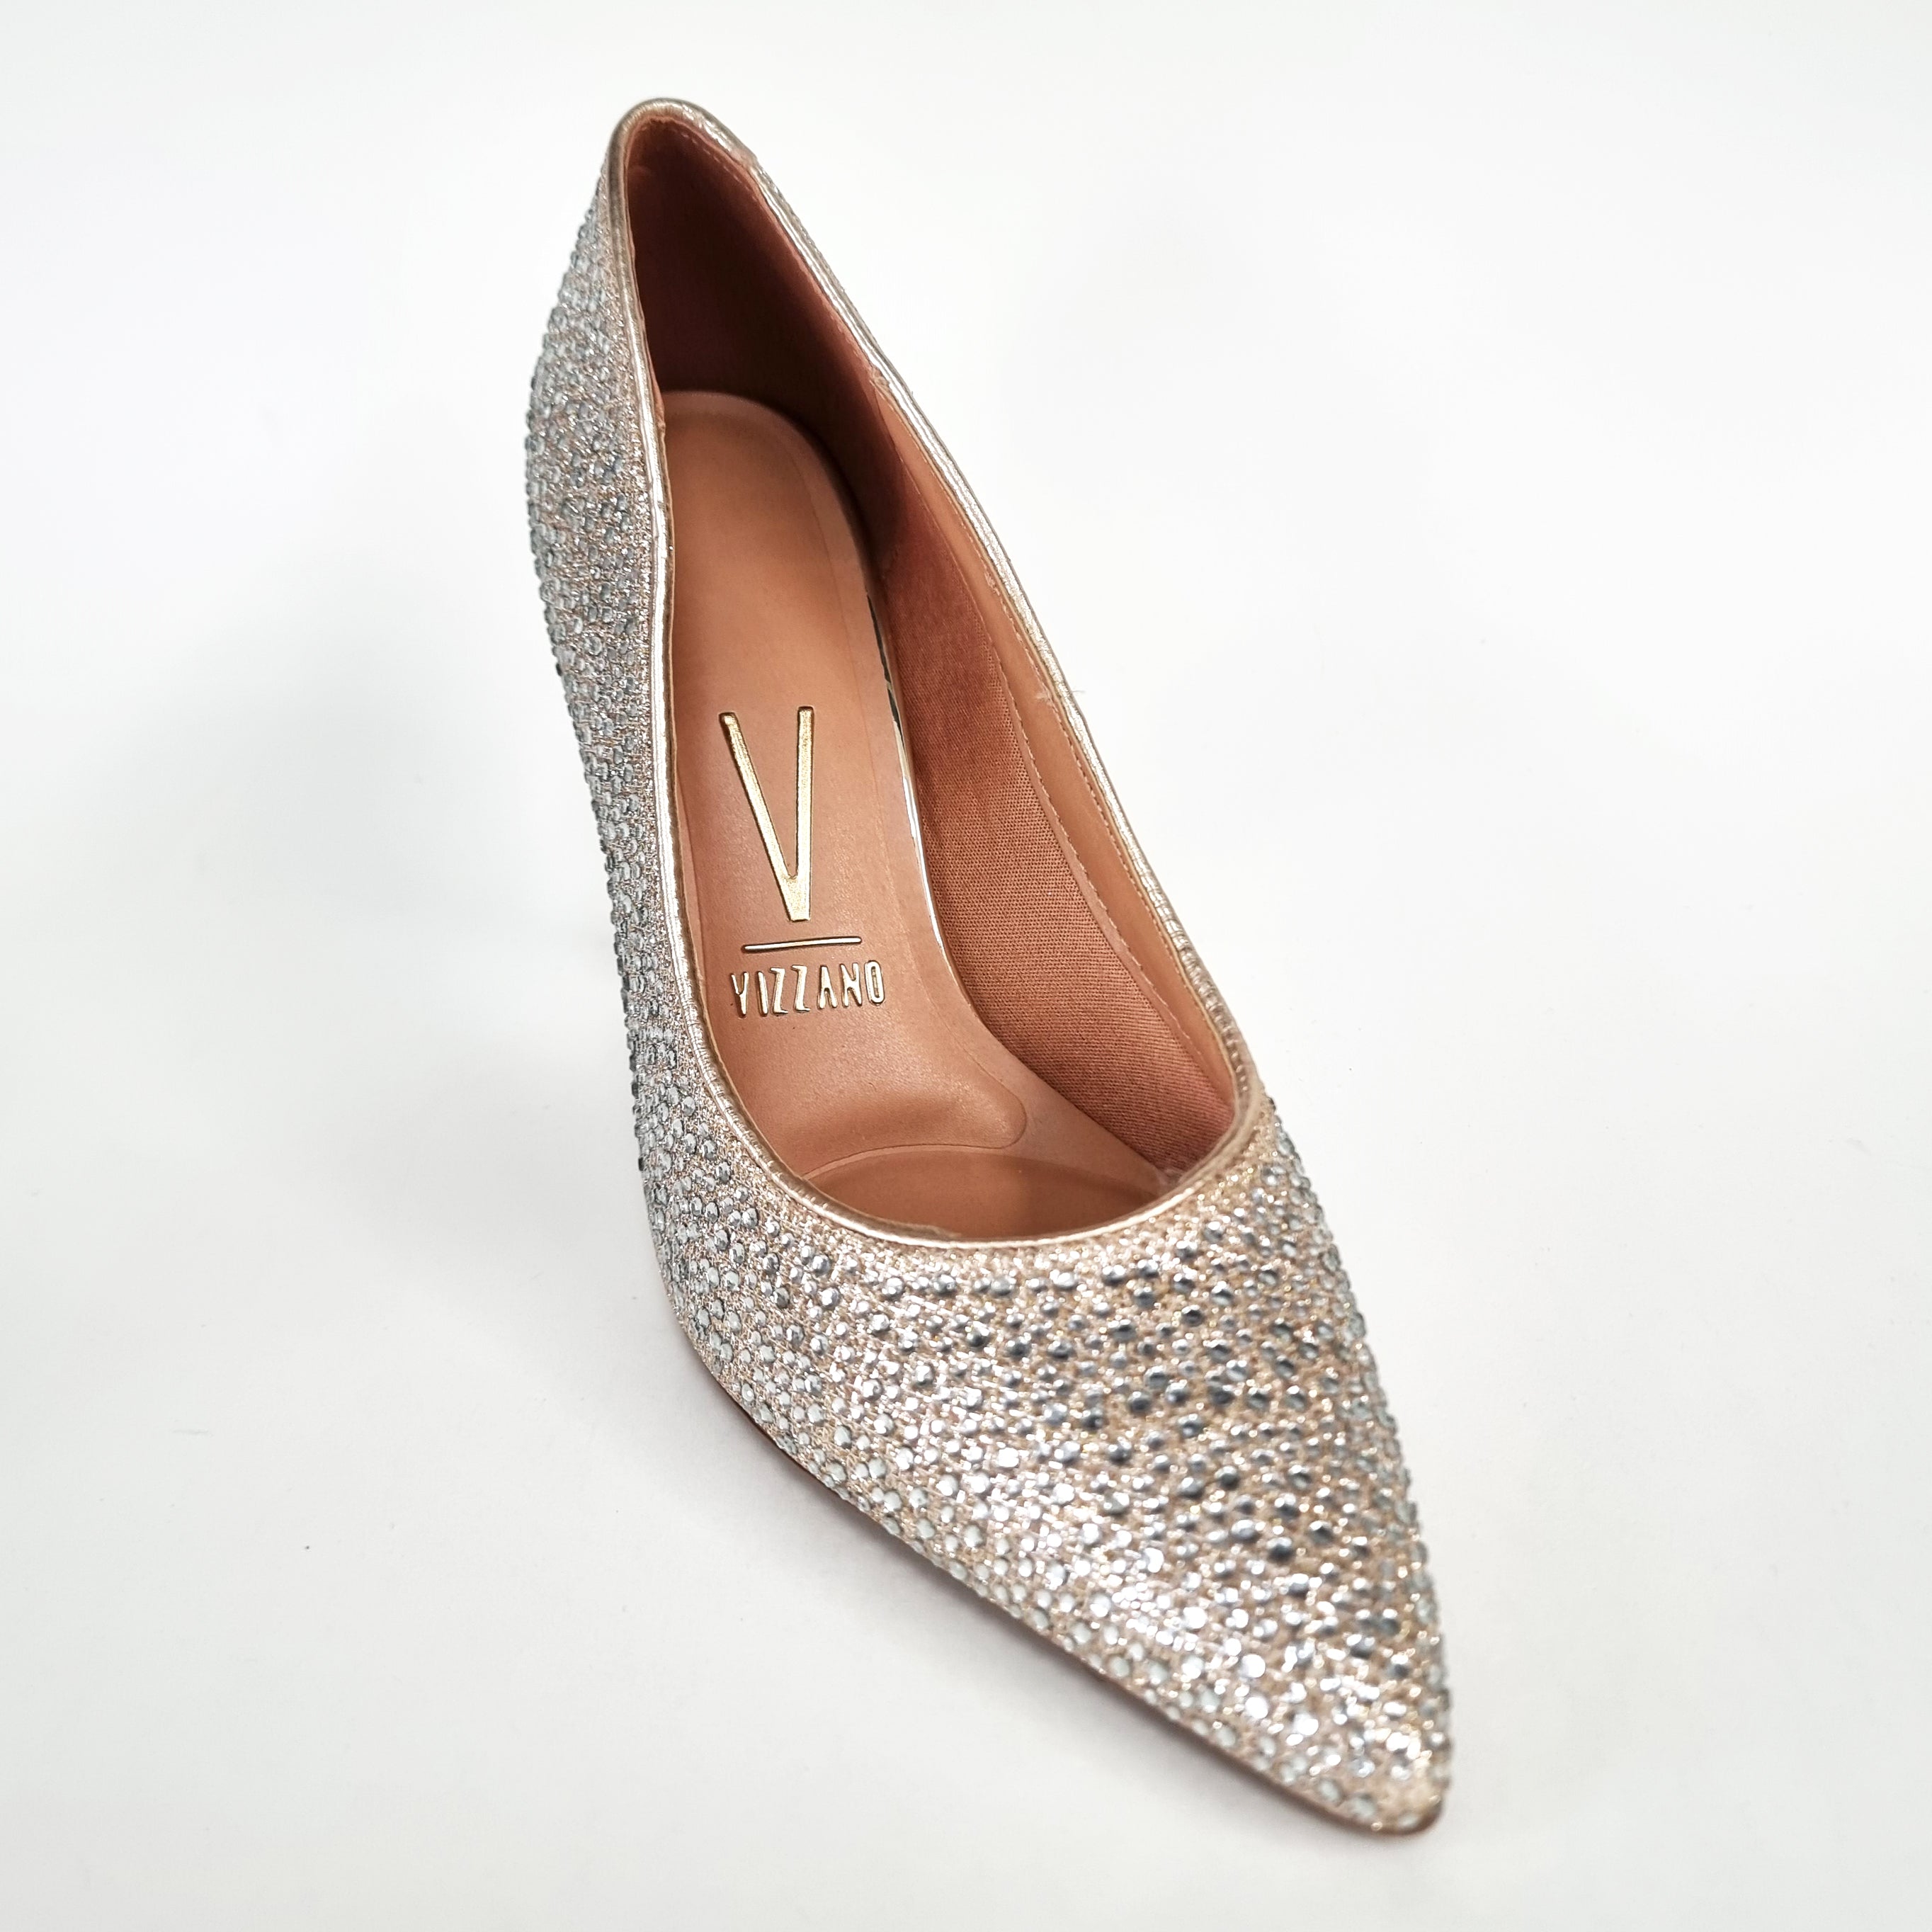 Vizzano 1184-1154 Studded Pointy Toe Pump in Gold